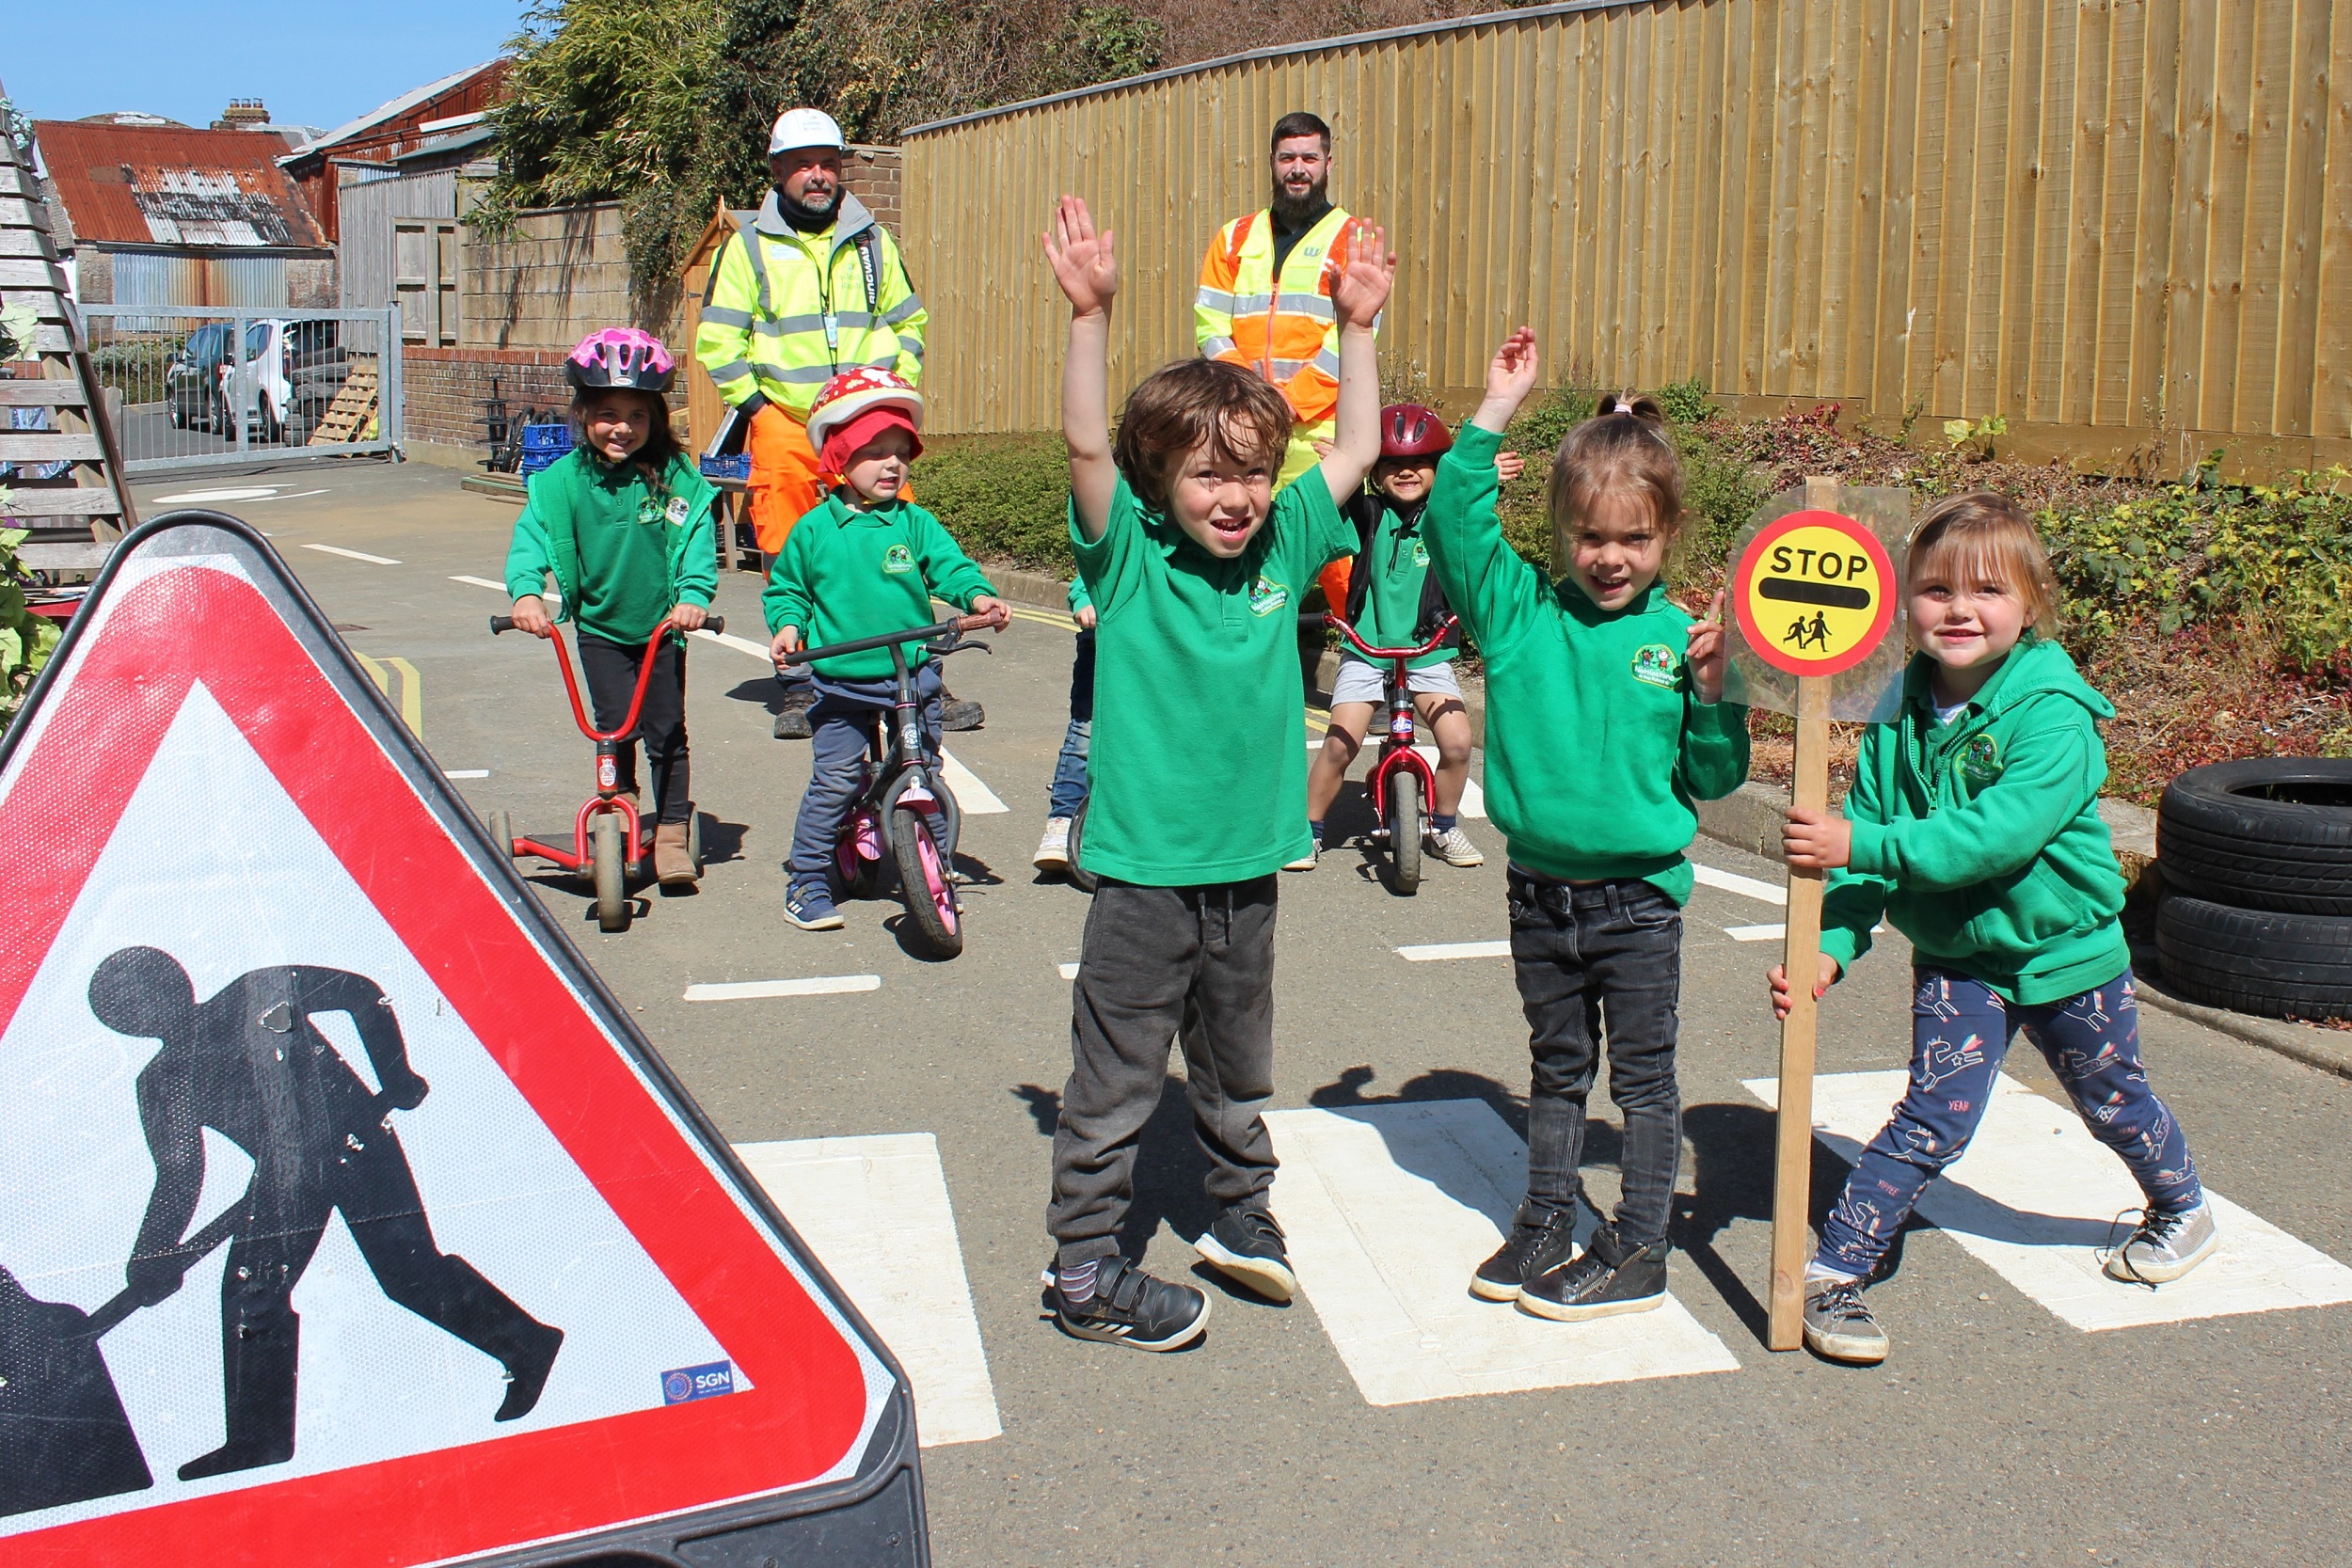 Photo showing school children on a pedestrian crossing that has been marked out on the playground, together with road signs, other children on bikes and Island Roads staff in the background